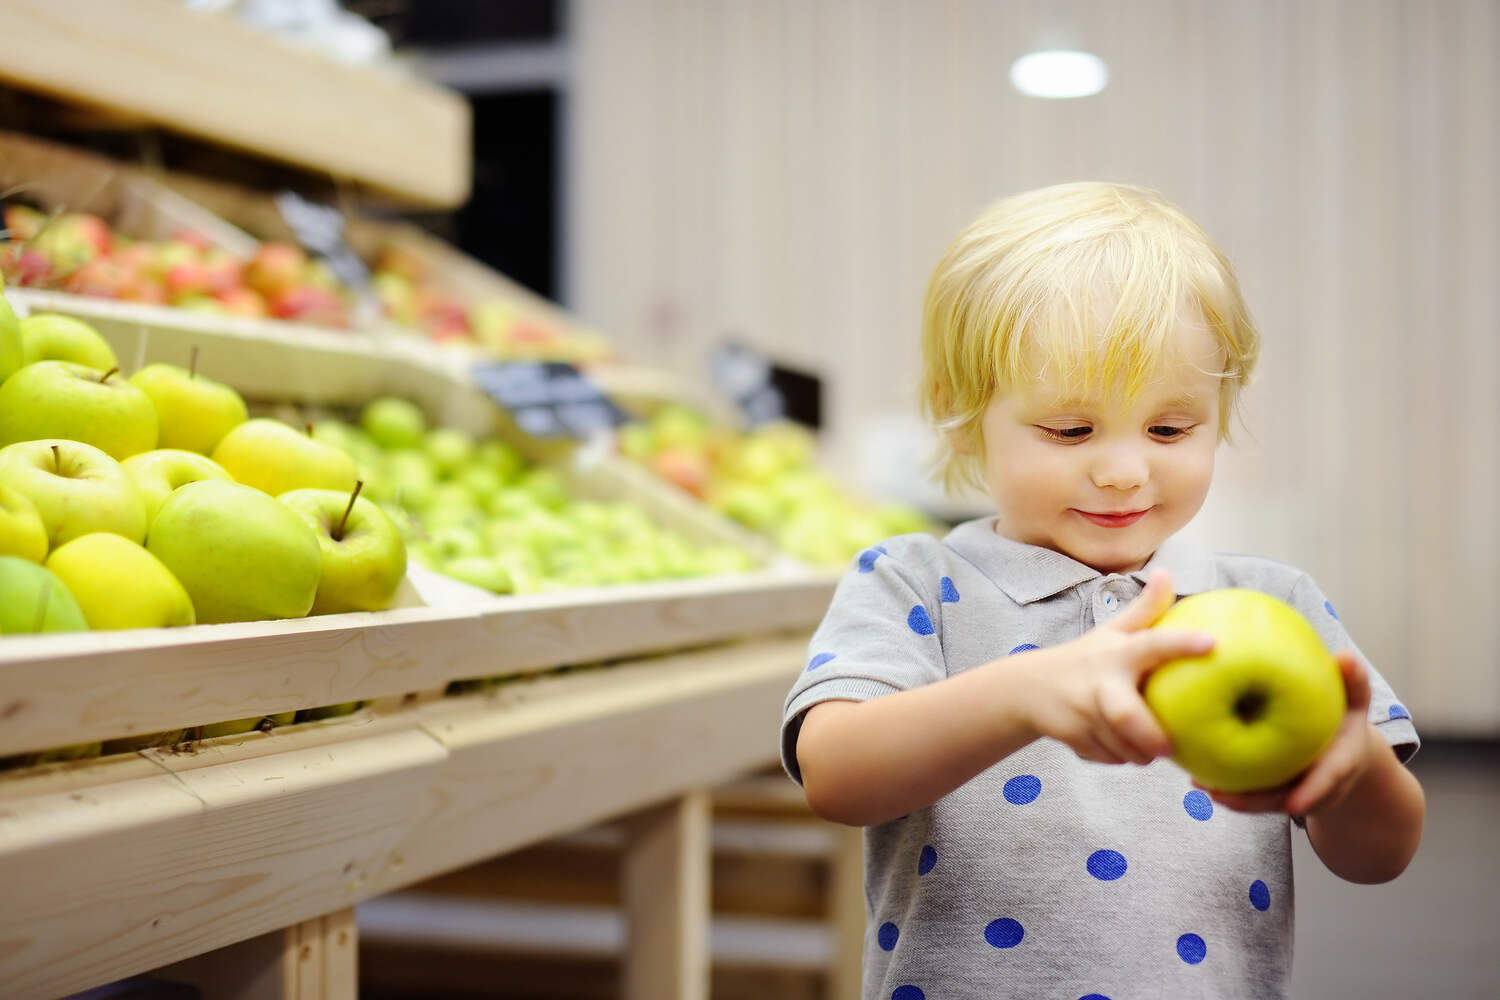 Involve your toddler in selecting the food they want to eat